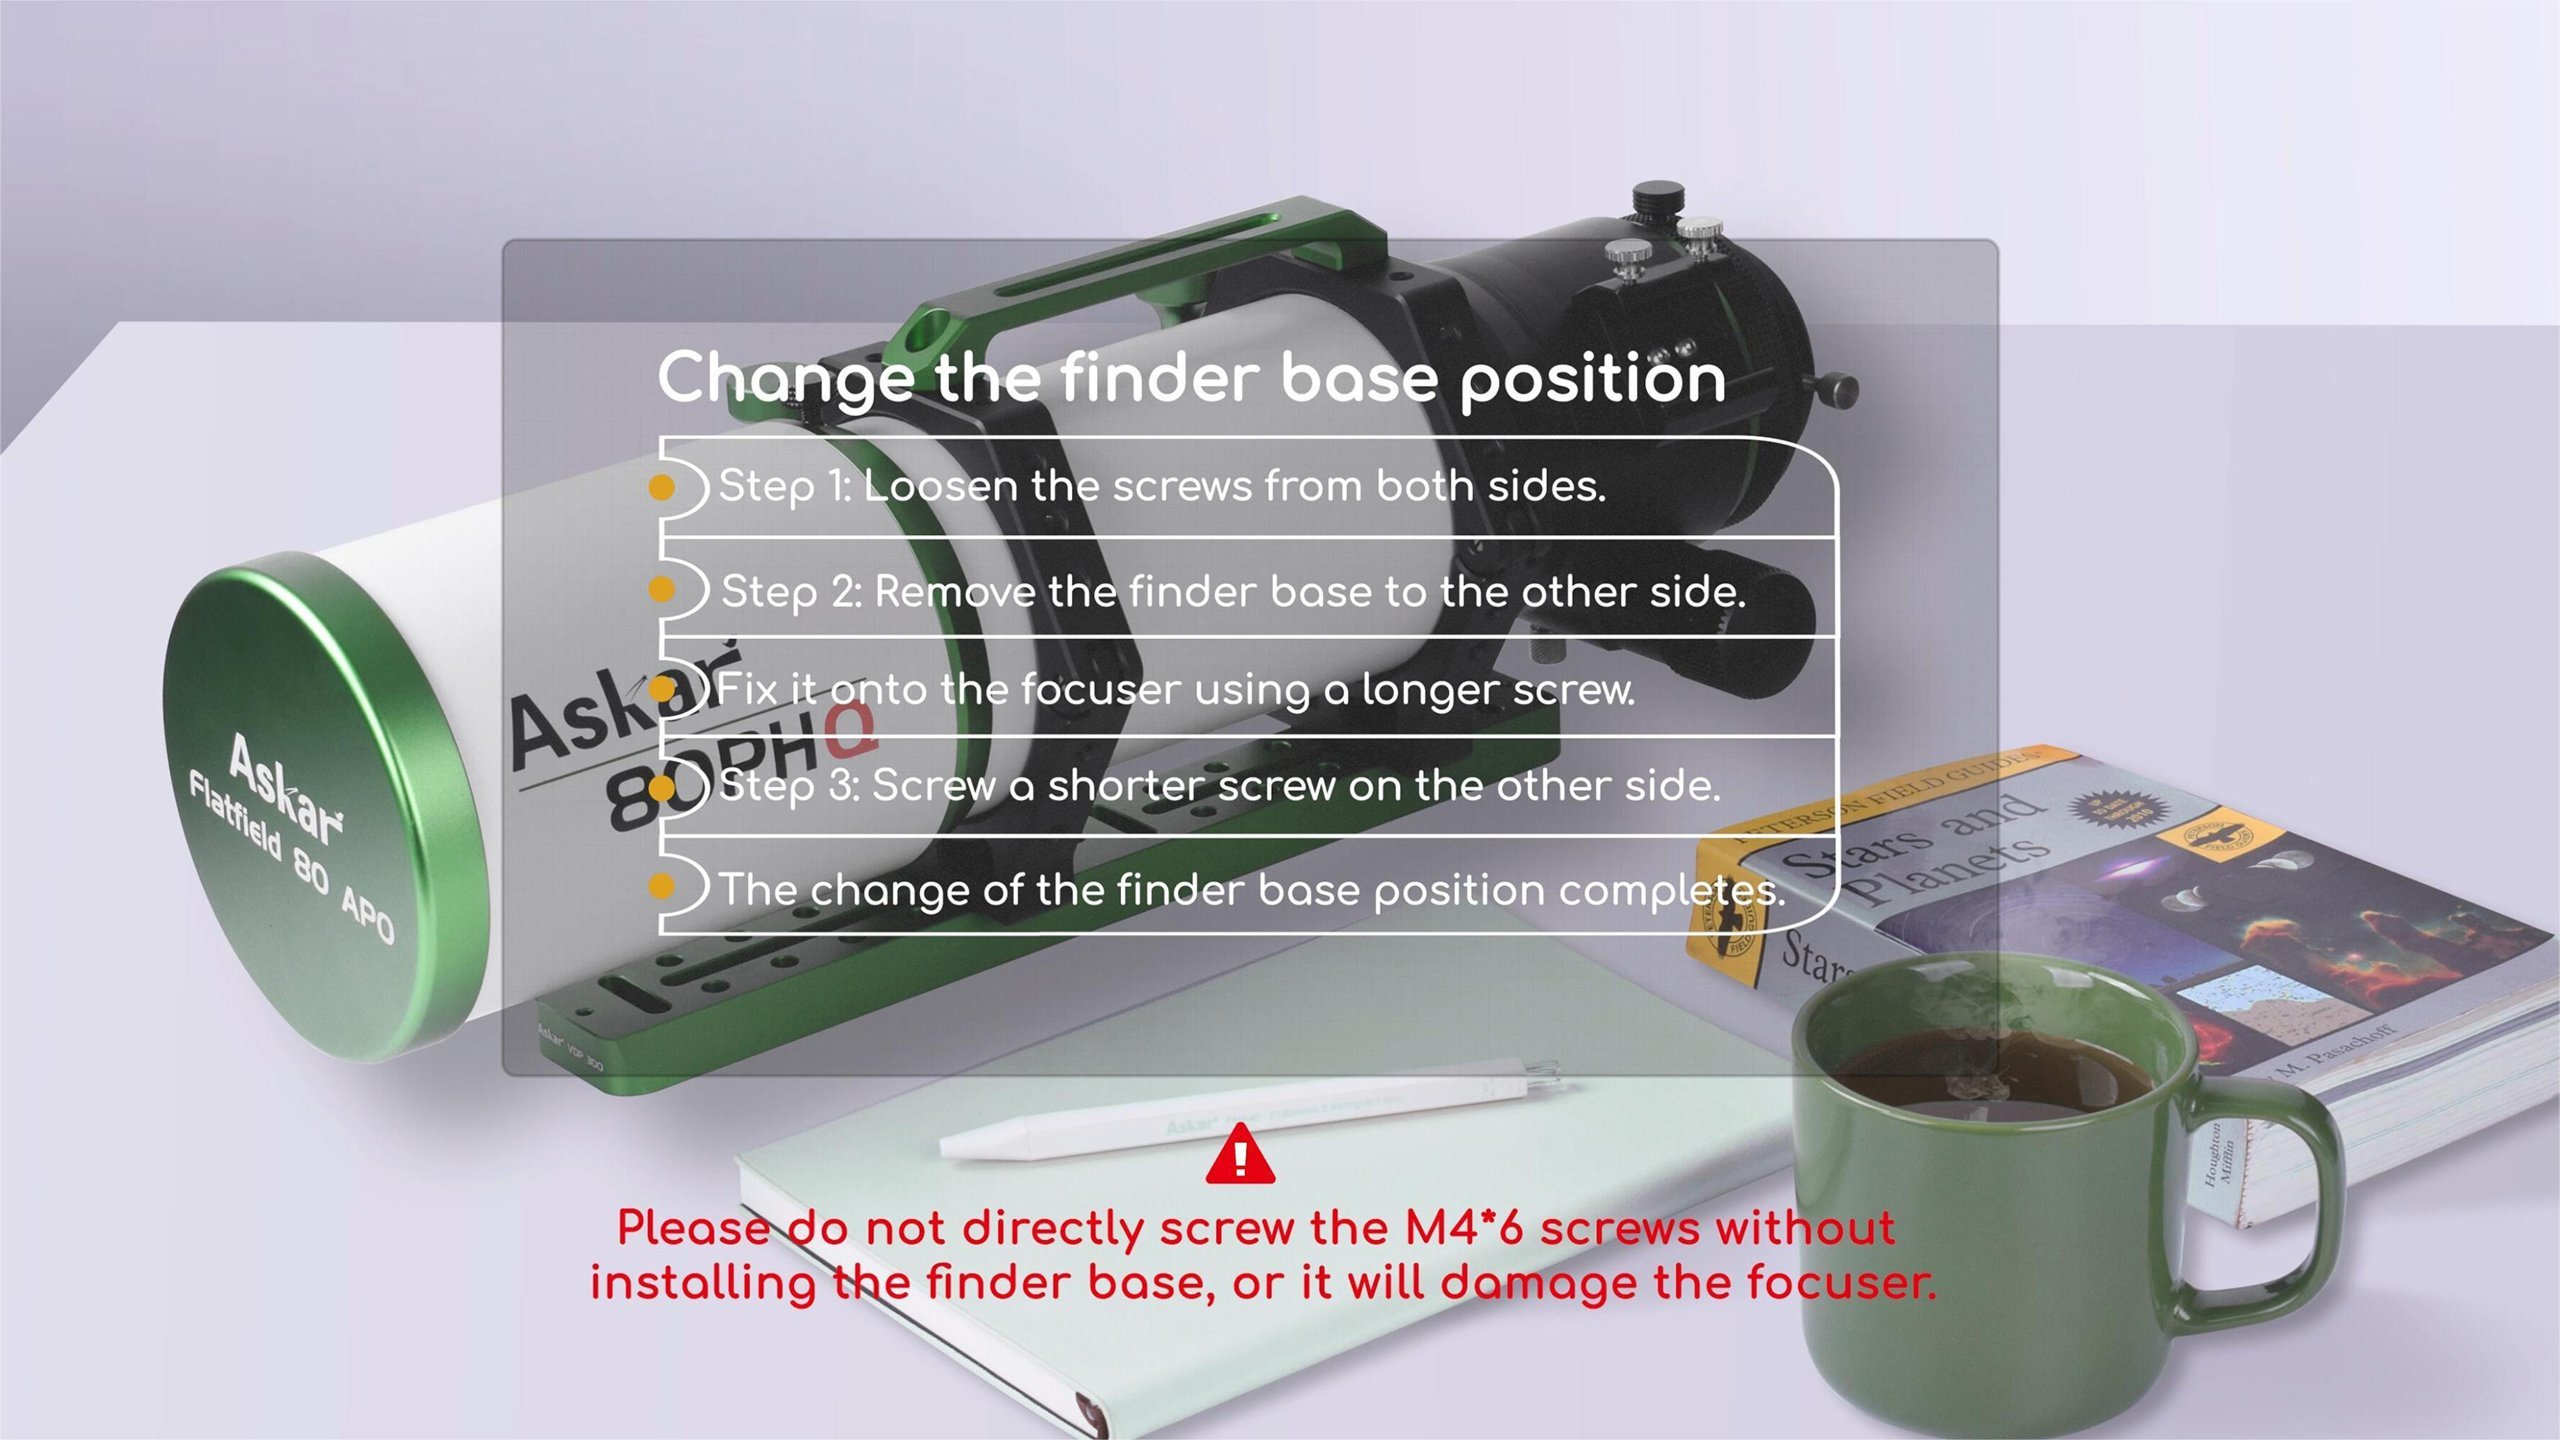 How to replace the location of the finder base(for Sharpstar&Askar telescopes)